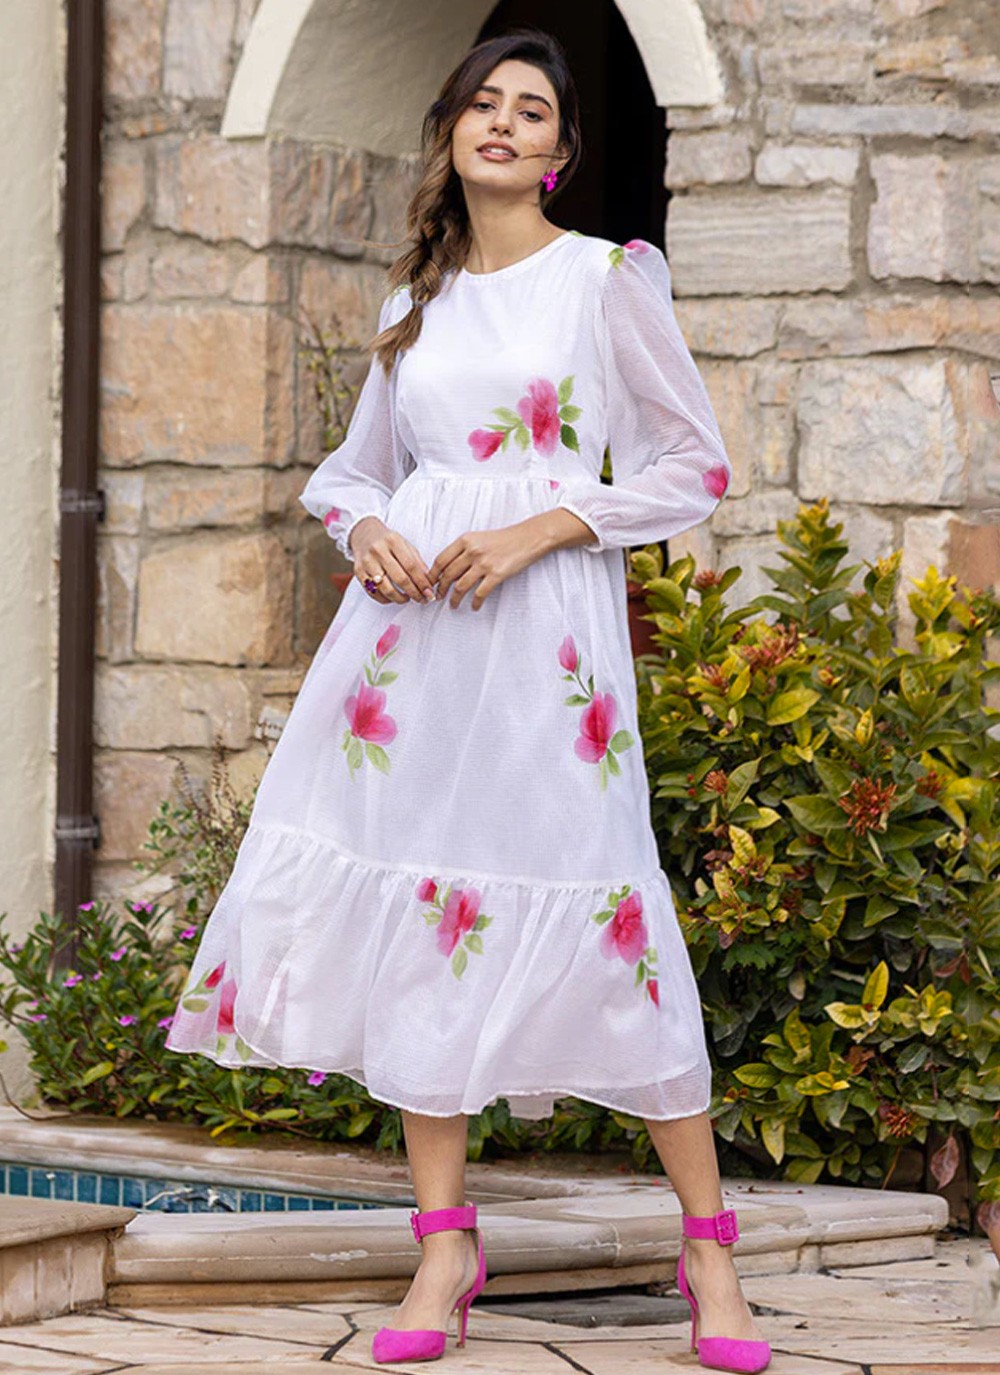 Buy White Kurtis For Women At Best Prices Online In India | Tata CLiQ